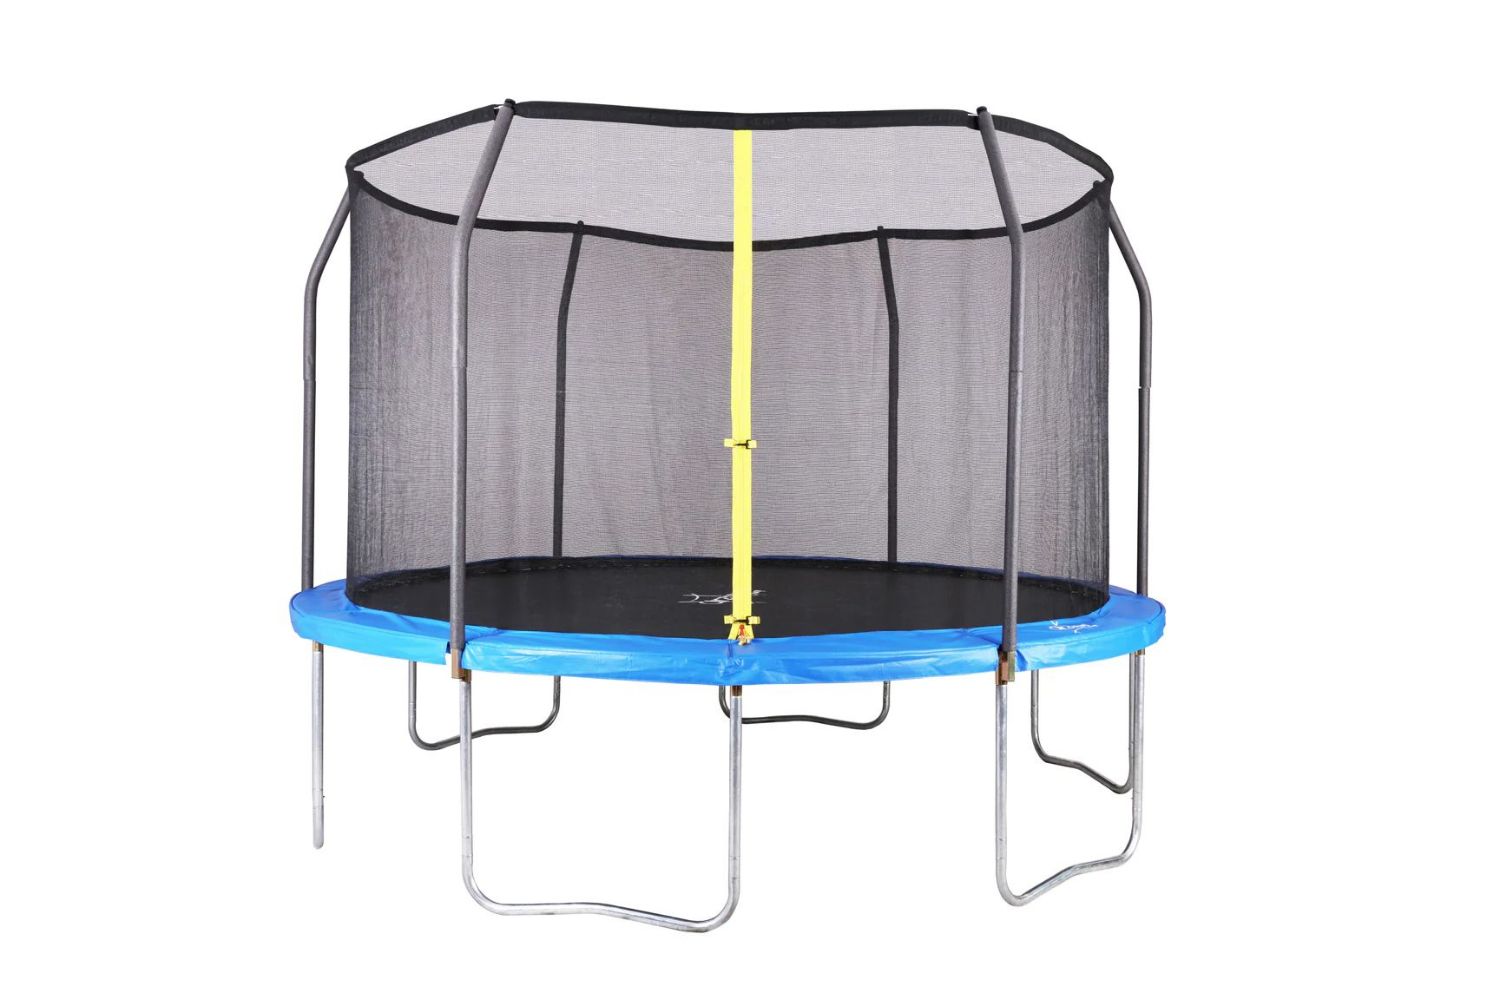 Brand New & Boxed 12 & 14 Foot High Quality Trampolines with Enclosures - Trade & Single Lots - Delivery Available!